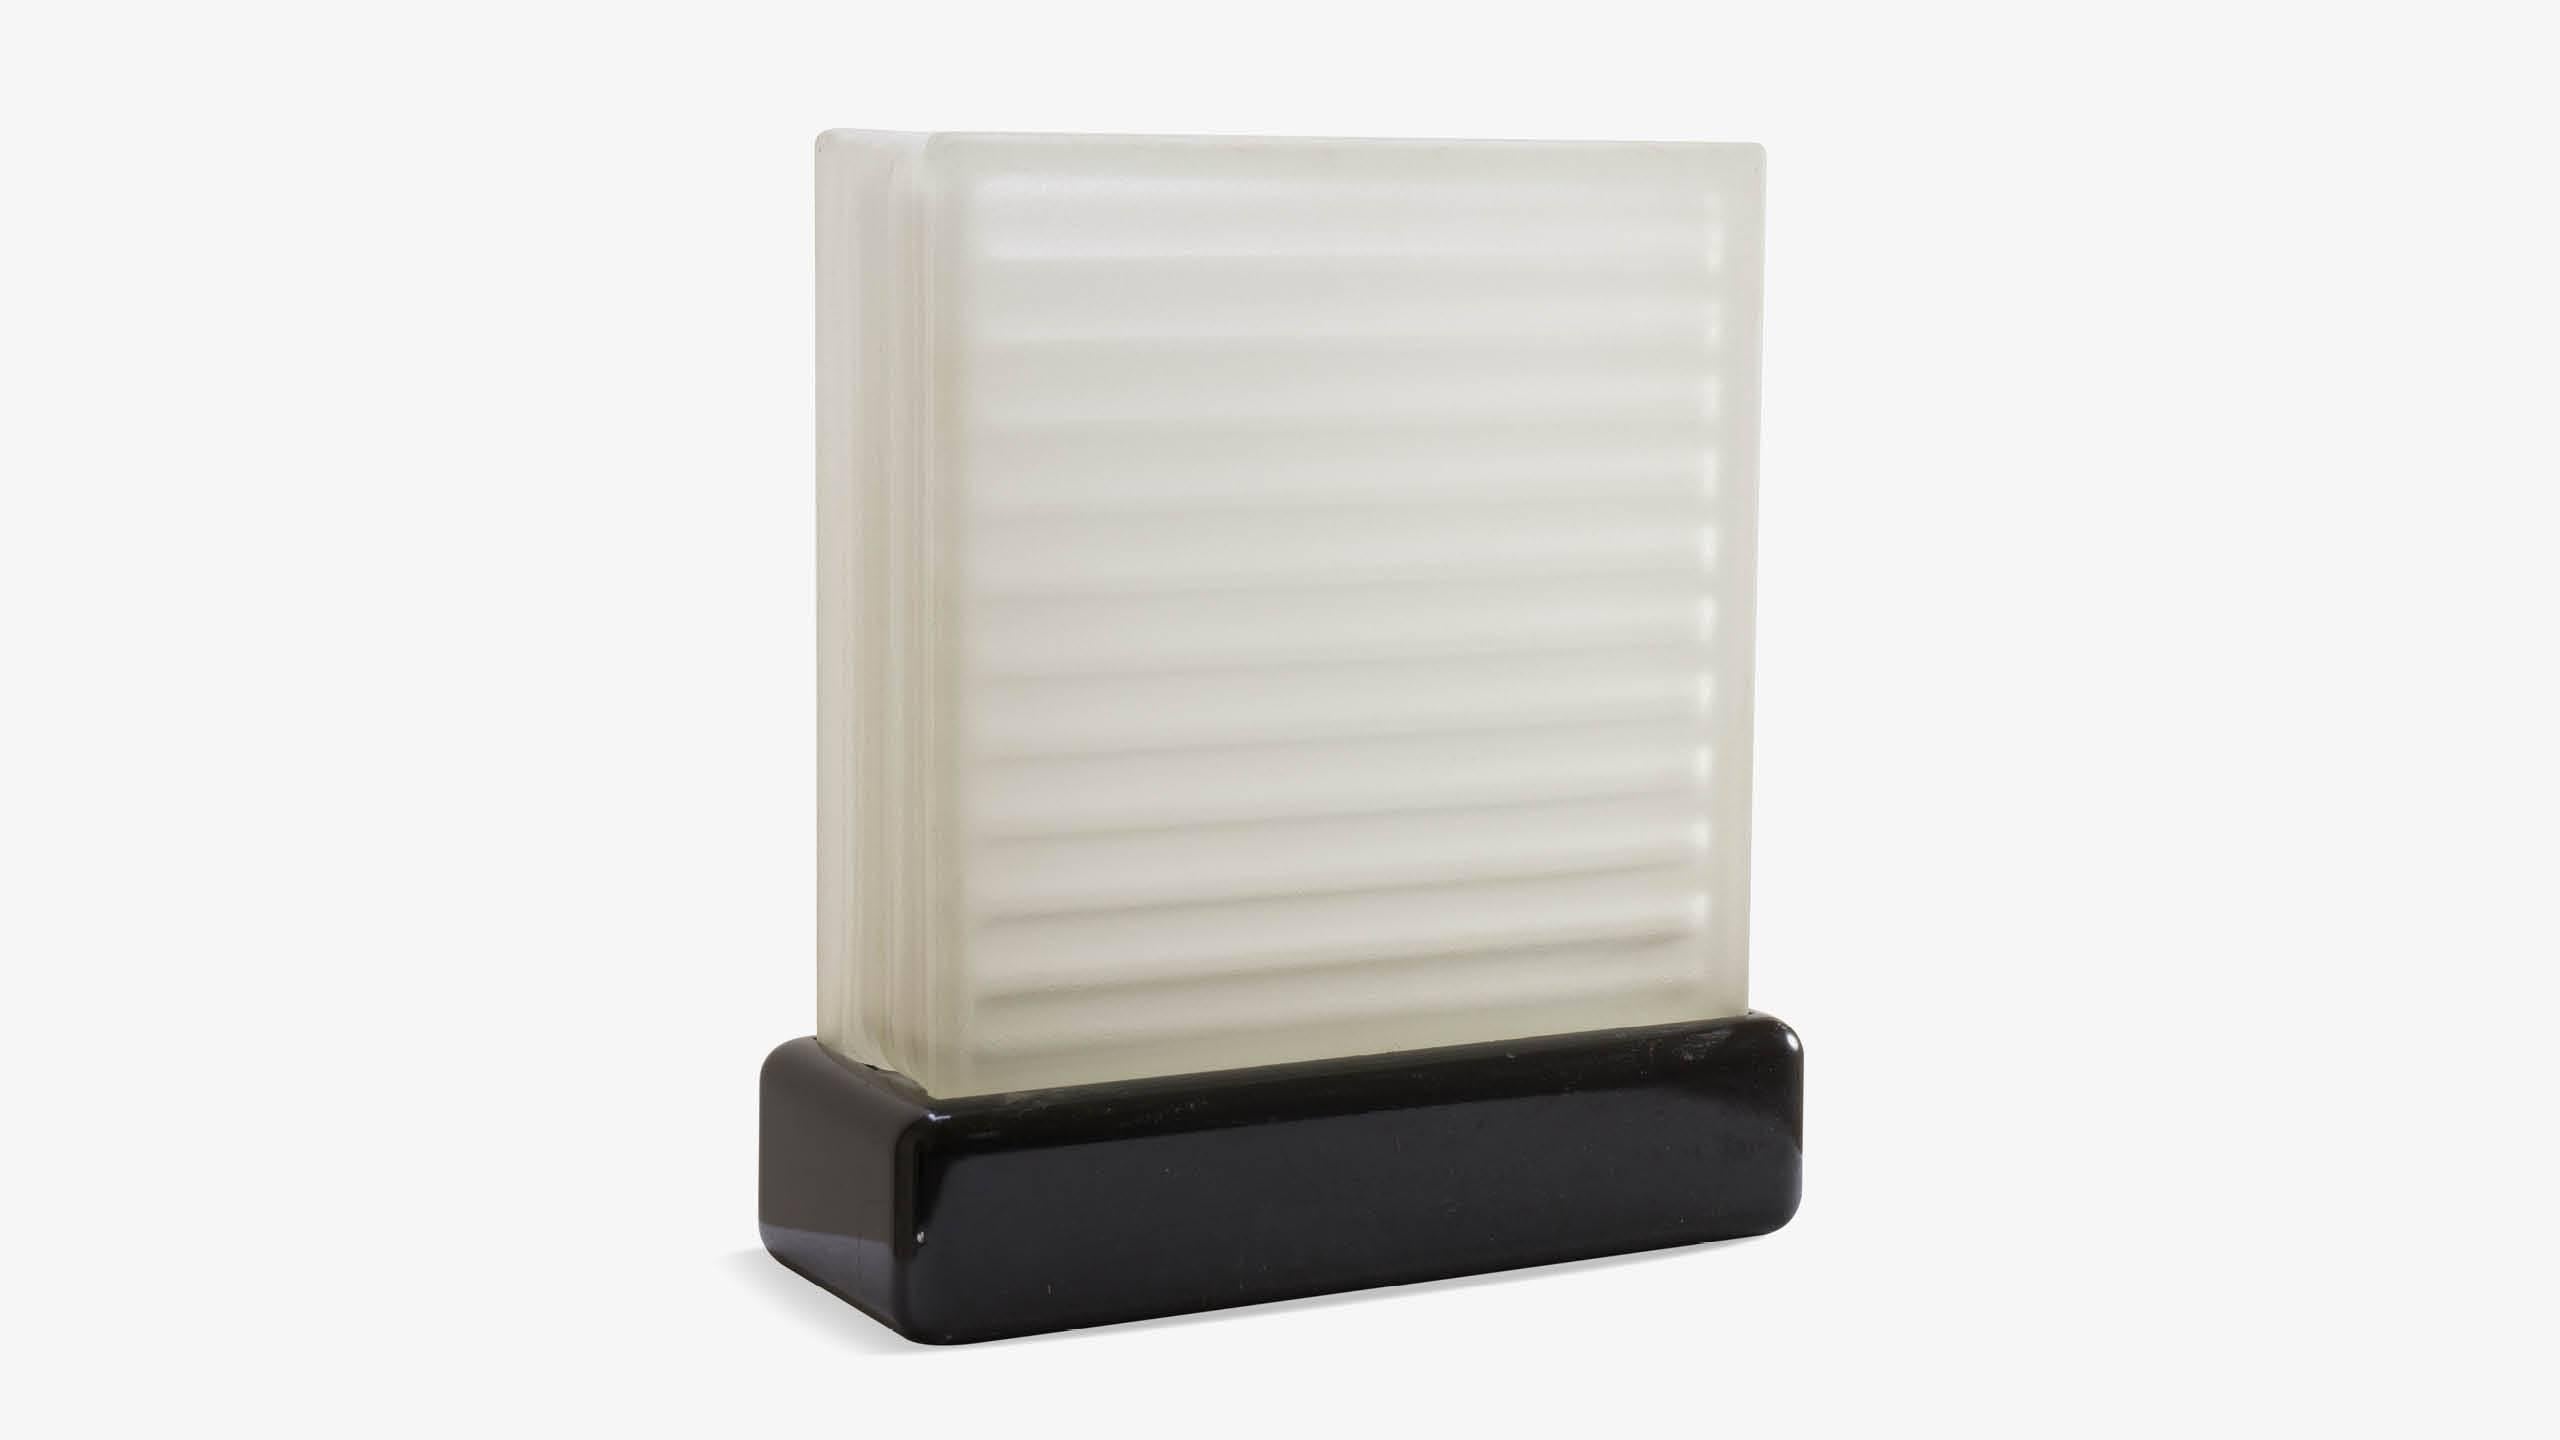 A functional piece of Art-Deco design, elegance and simplicity in one. A large frosted glass block sets inside a black base which cases a bulb. The glass block illuminates entirely delivering excellent accent lighting. Equipped with a sliding dimmer